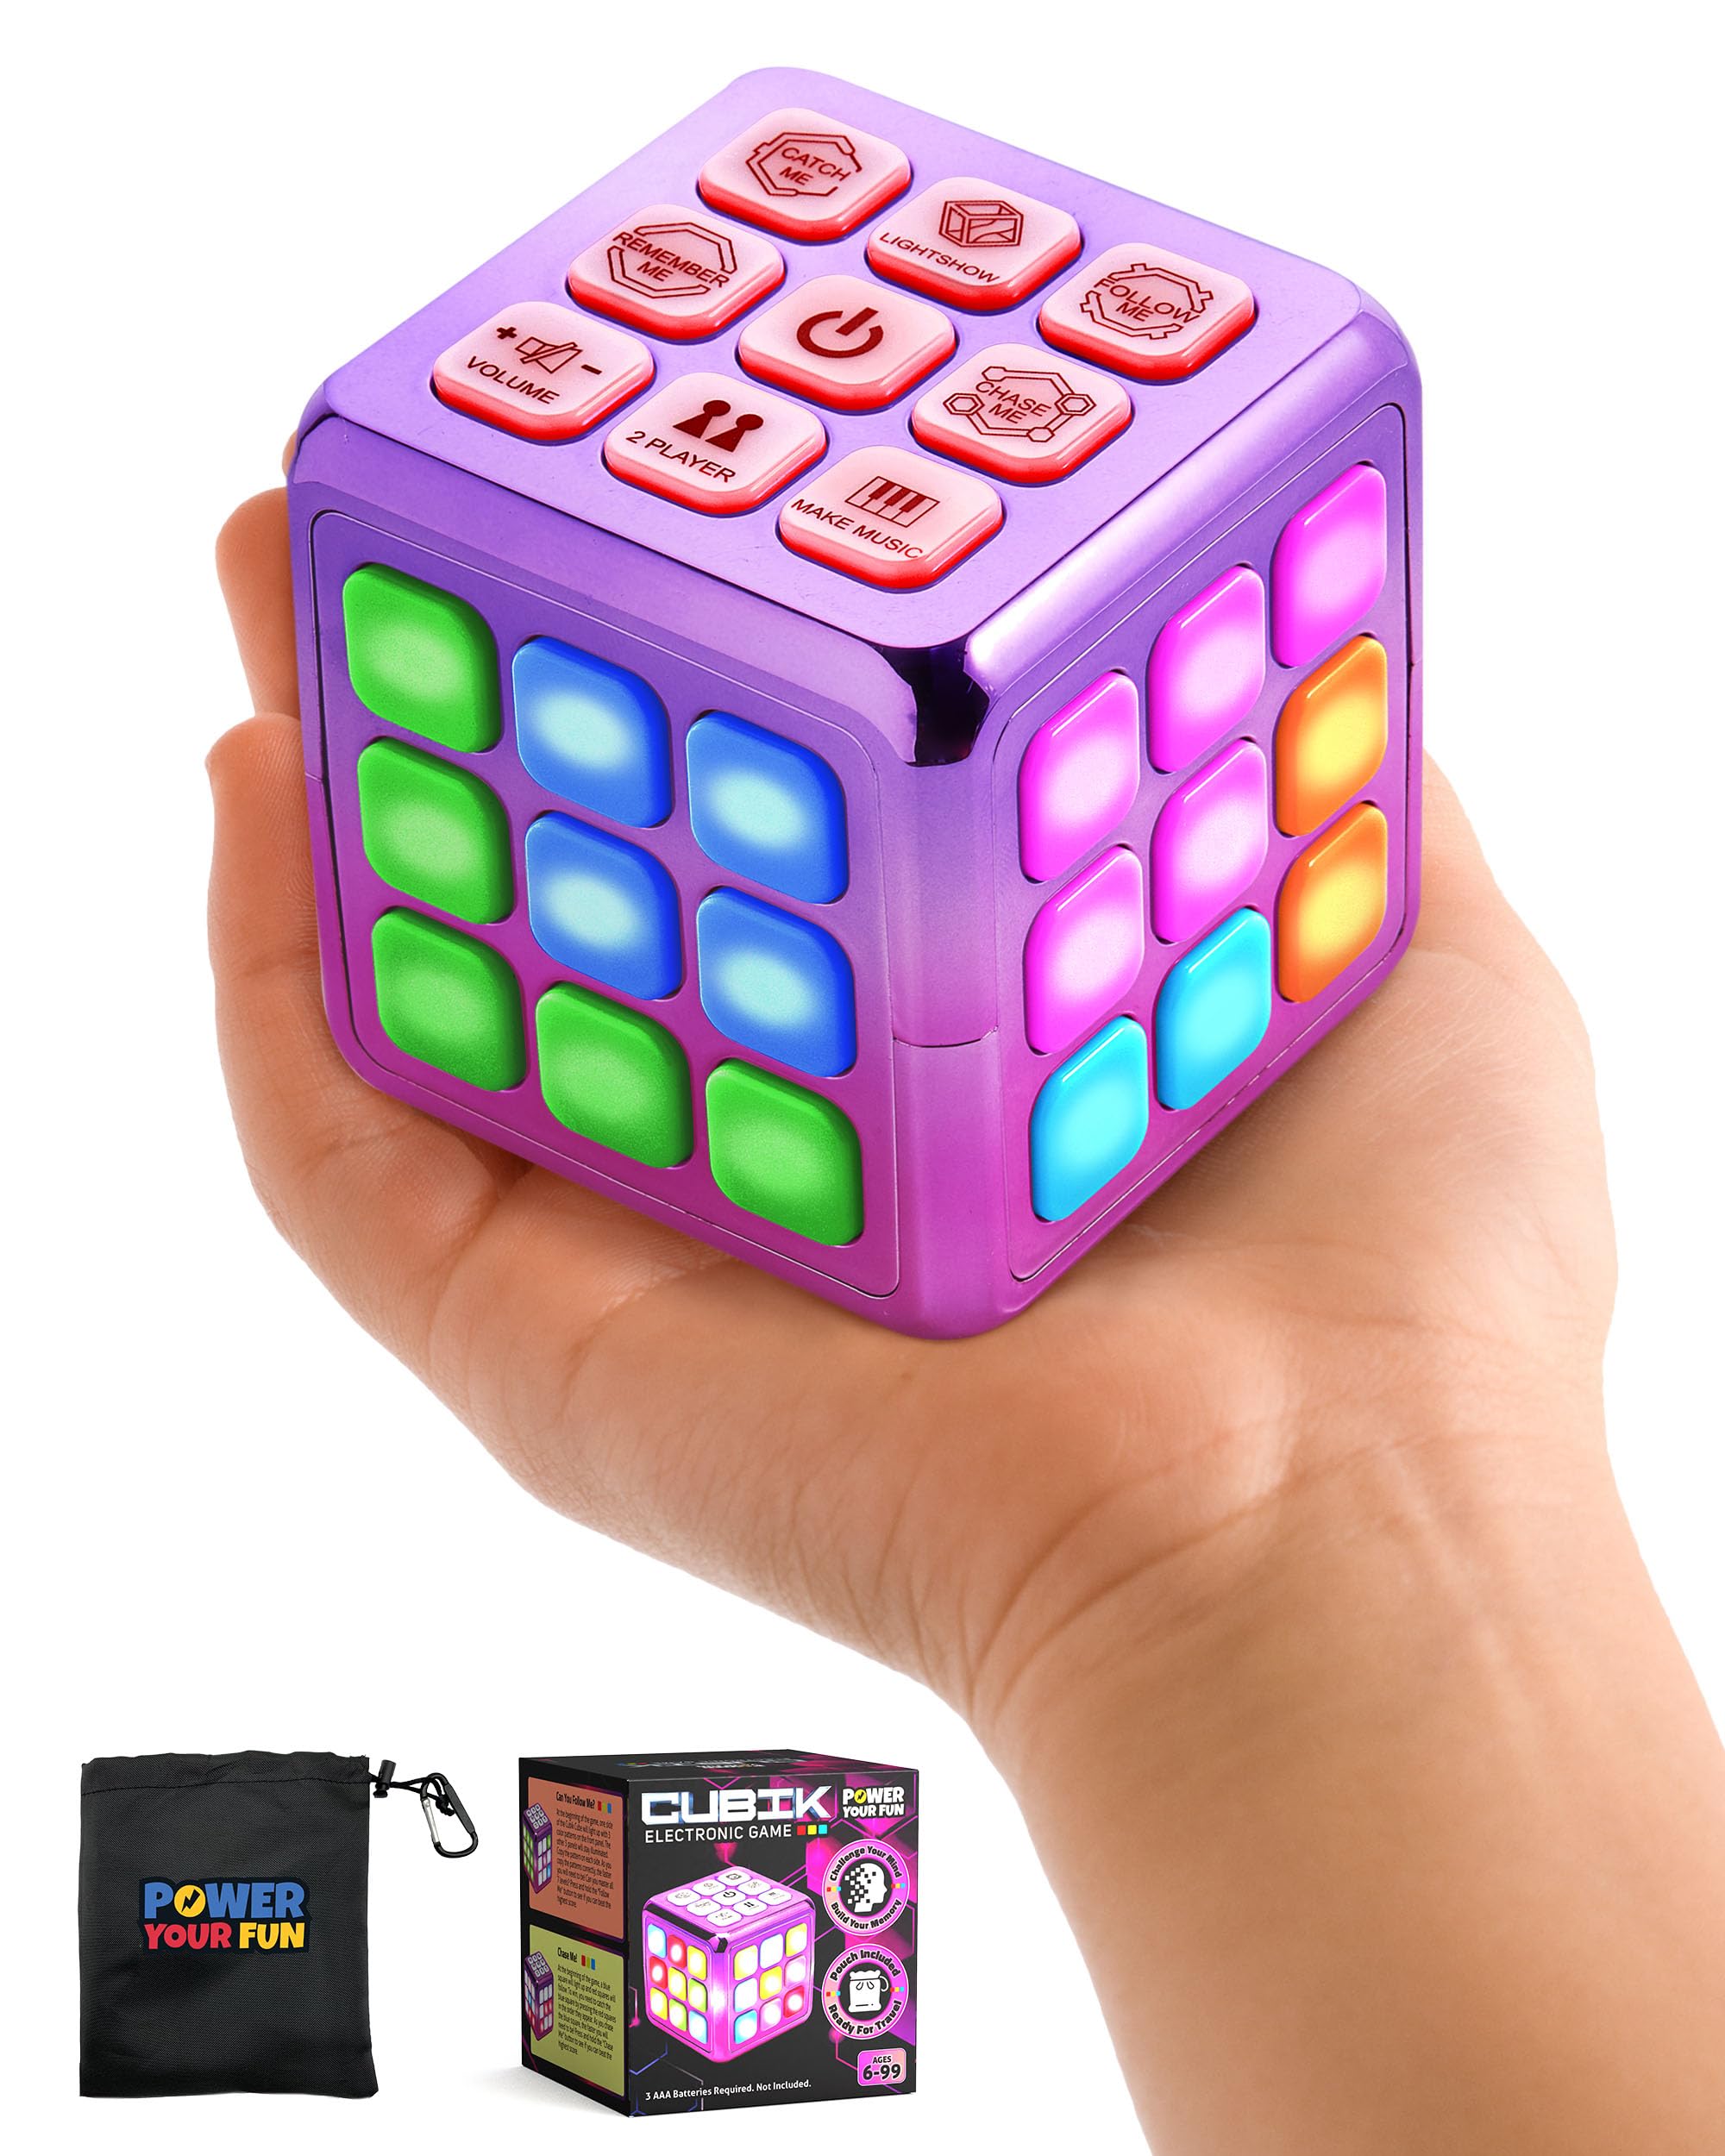 Power Your Fun Robo Pets Unicorn AND Cubik Metallic Pink LED Flashing Cube Memory Game- (1)Remote Control Toy with Interactive Hand Motion Gestures and (1)Electronic Handheld Game 5 Brain Memory Games